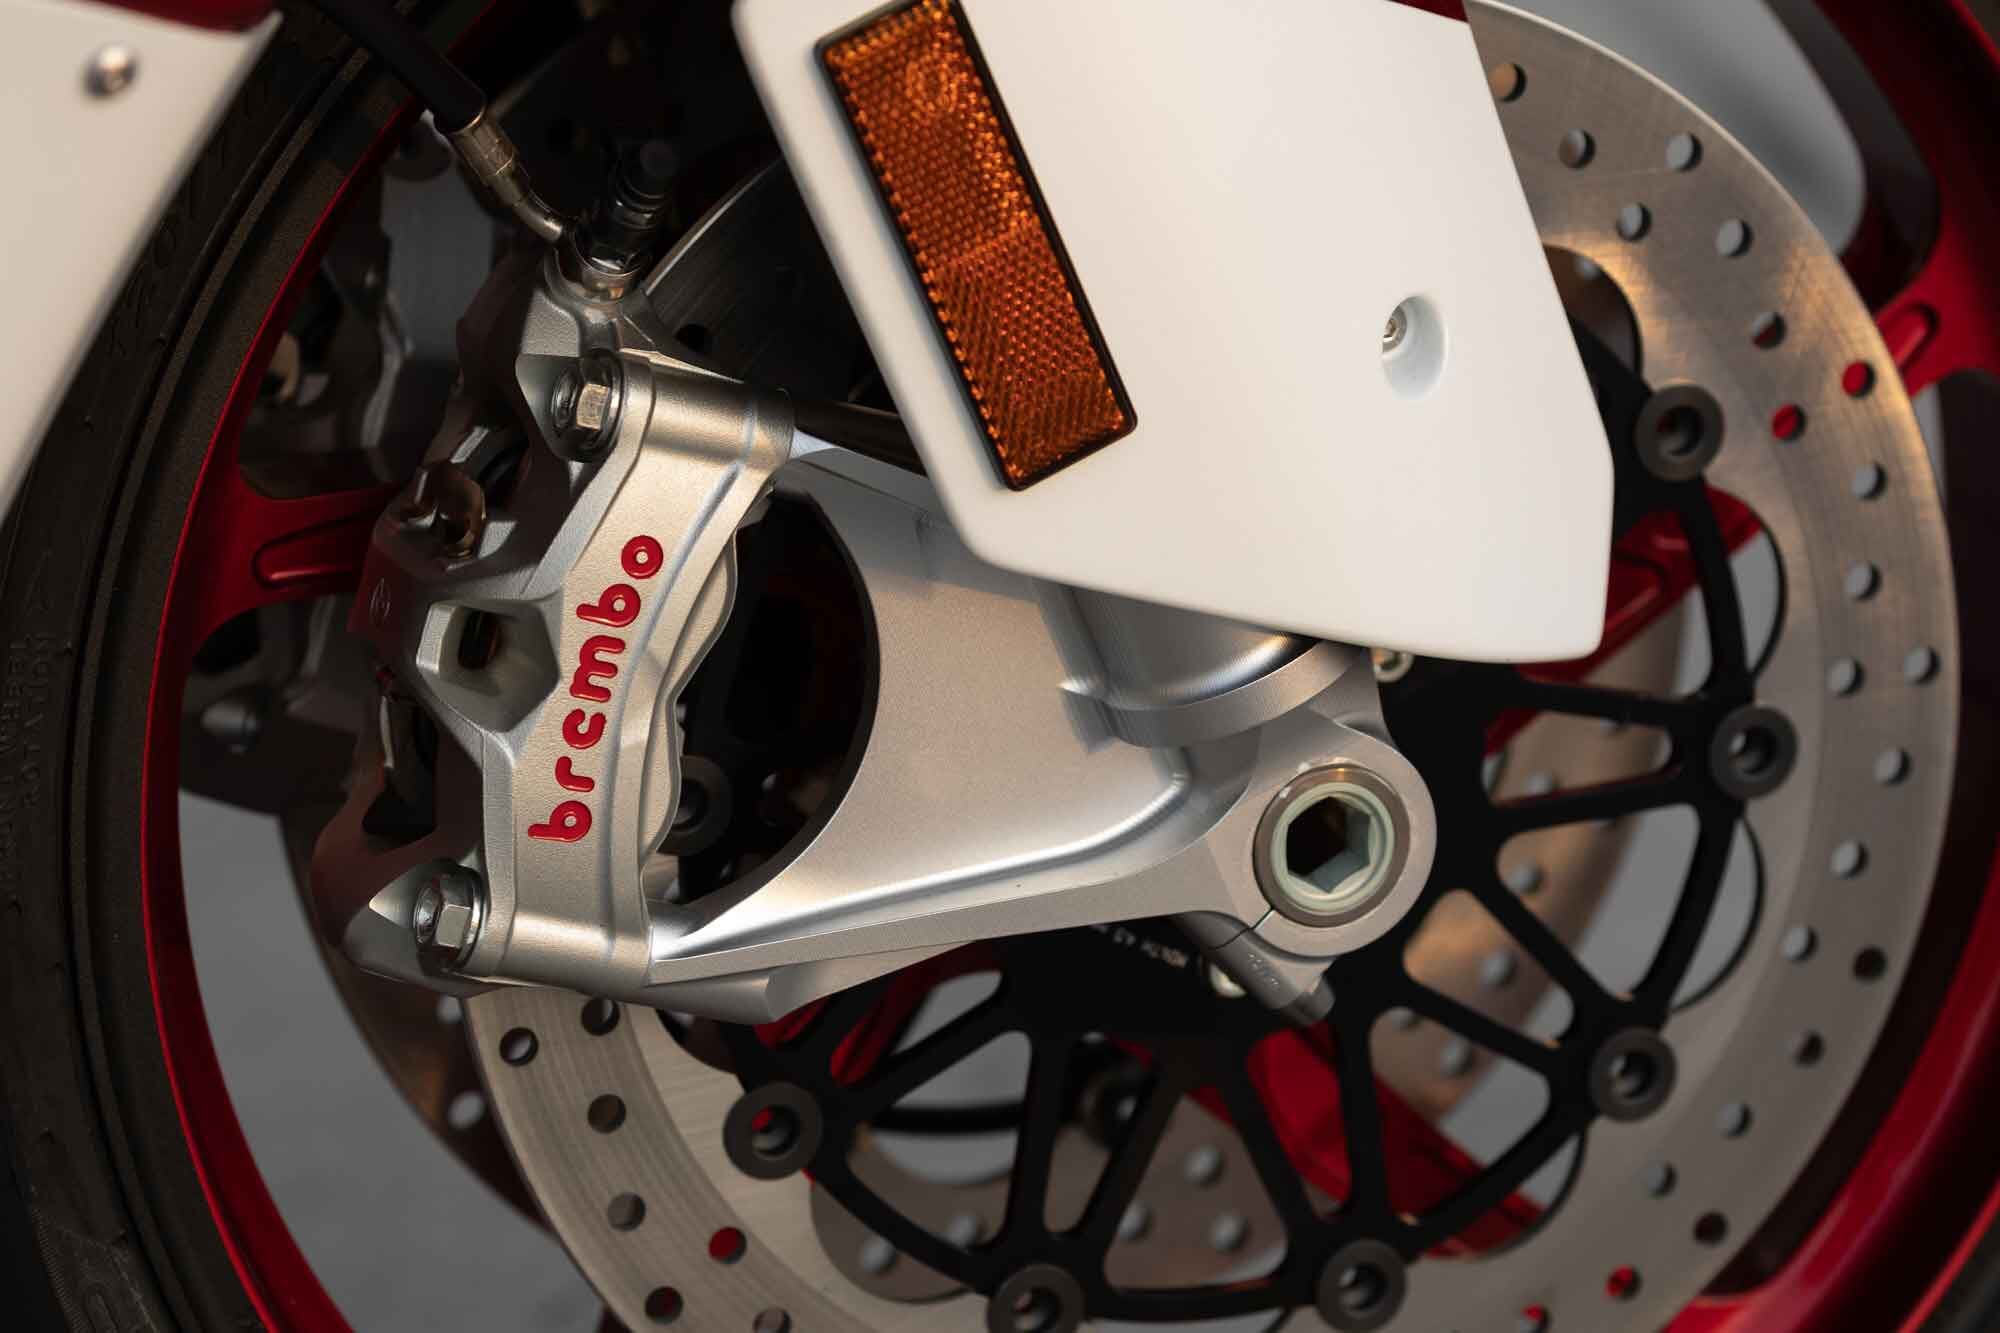 Brembo radial calipers have top-shelf stopping power.